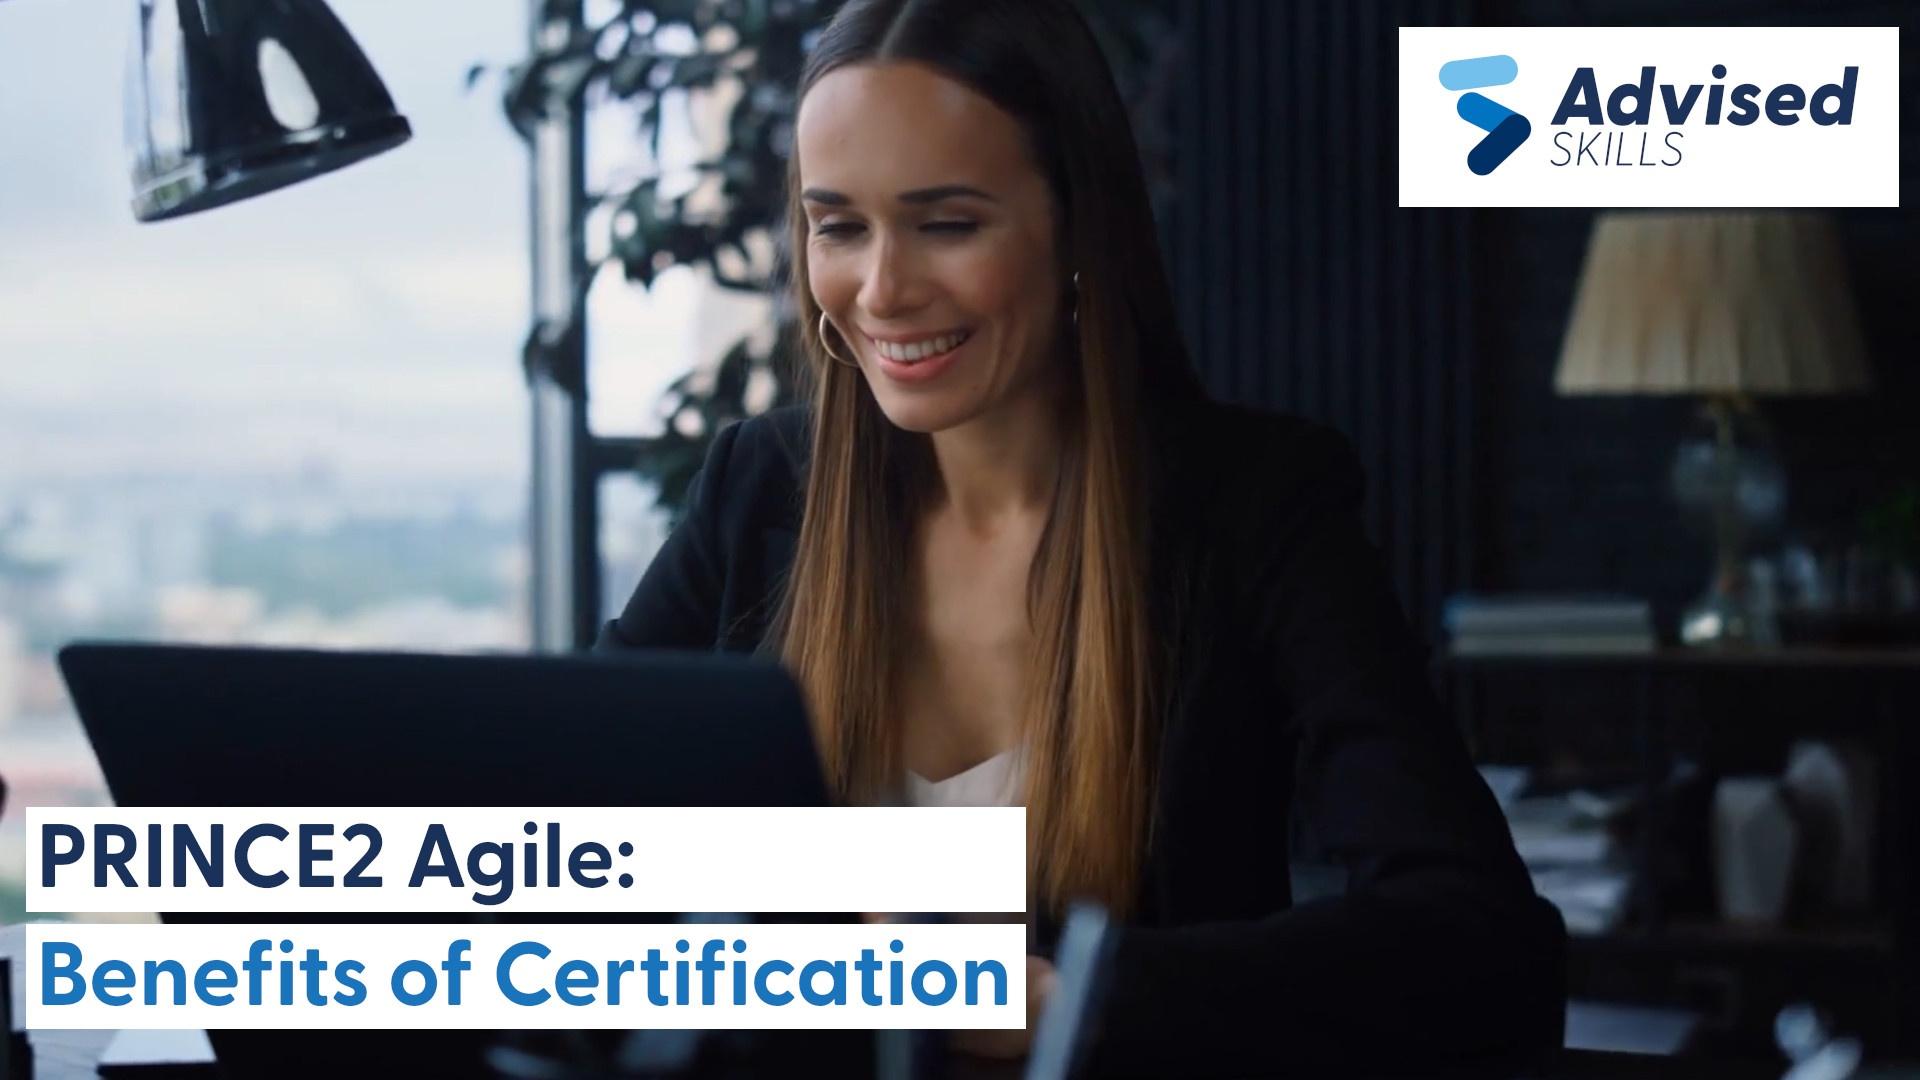 PRINCE2 Agile: Benefits of Certification